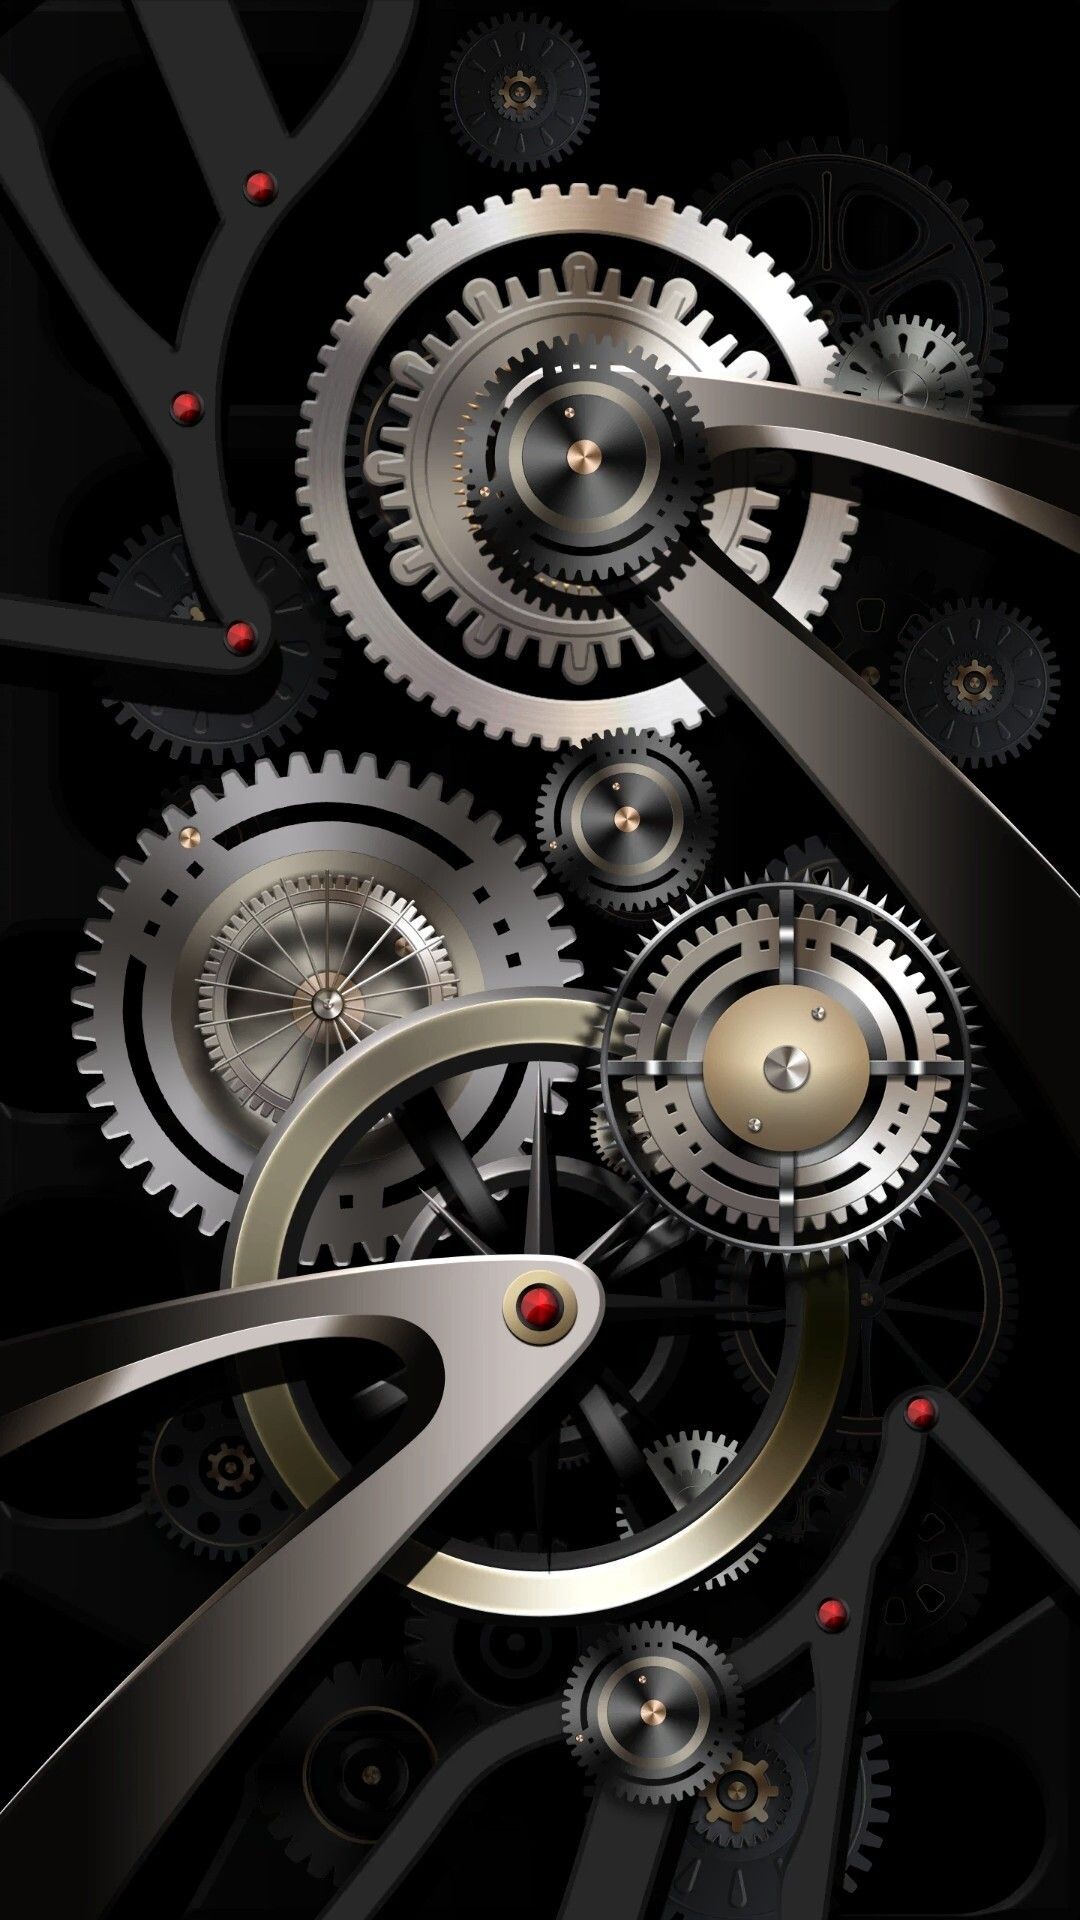 Gear: Steampunk, A wheel having cut teeth that mesh with teeth in another wheel to transmit force and motion. 1080x1920 Full HD Background.